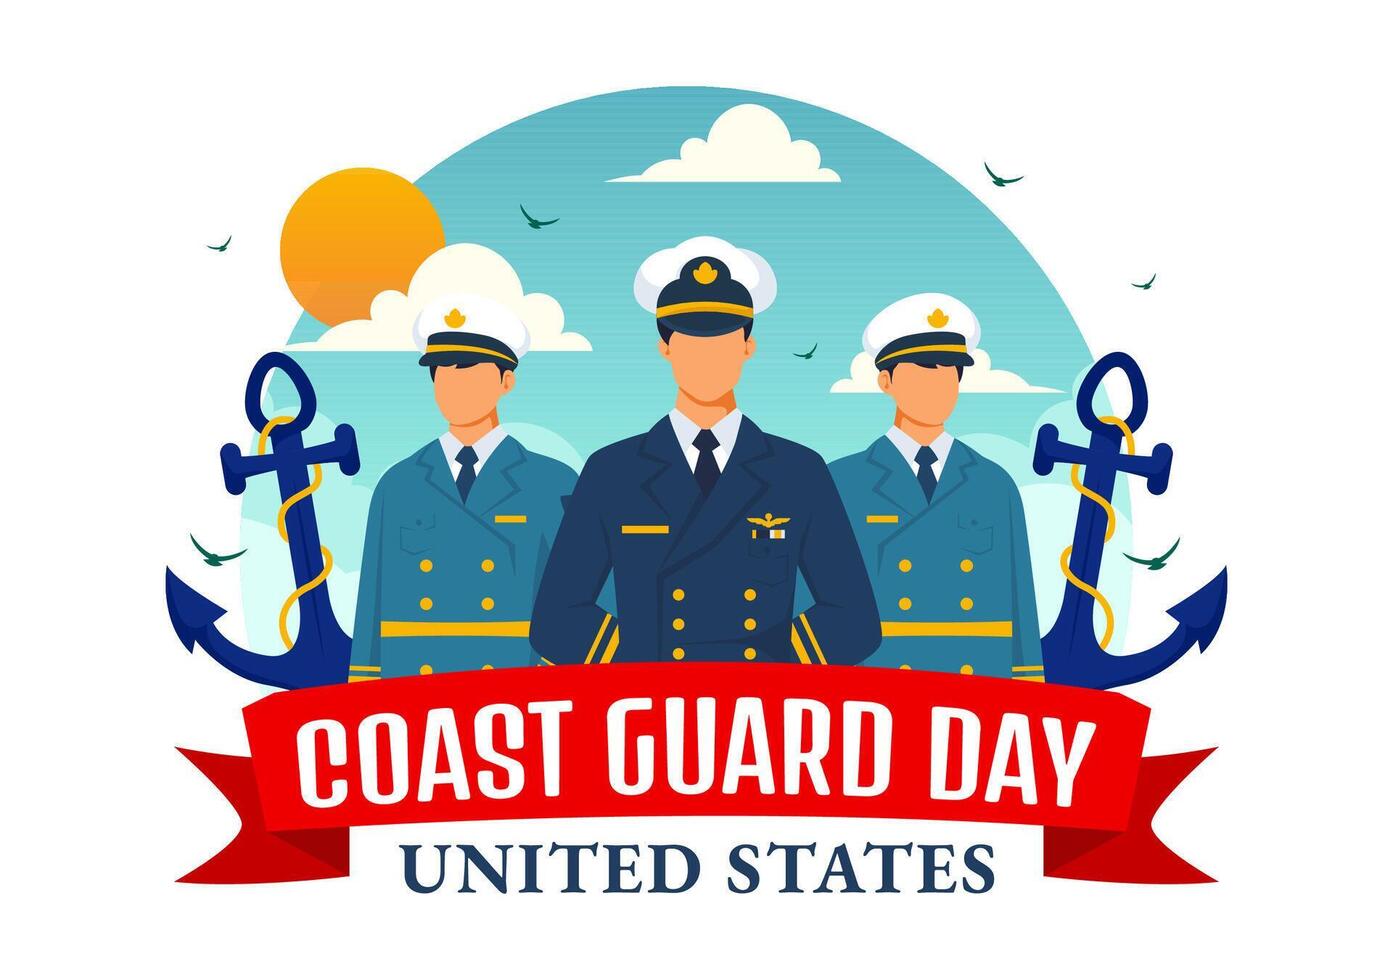 United States Coast Guard Day Illustration on August 4 with American Waving Flag and Ship in National Holiday Flat Cartoon Background vector